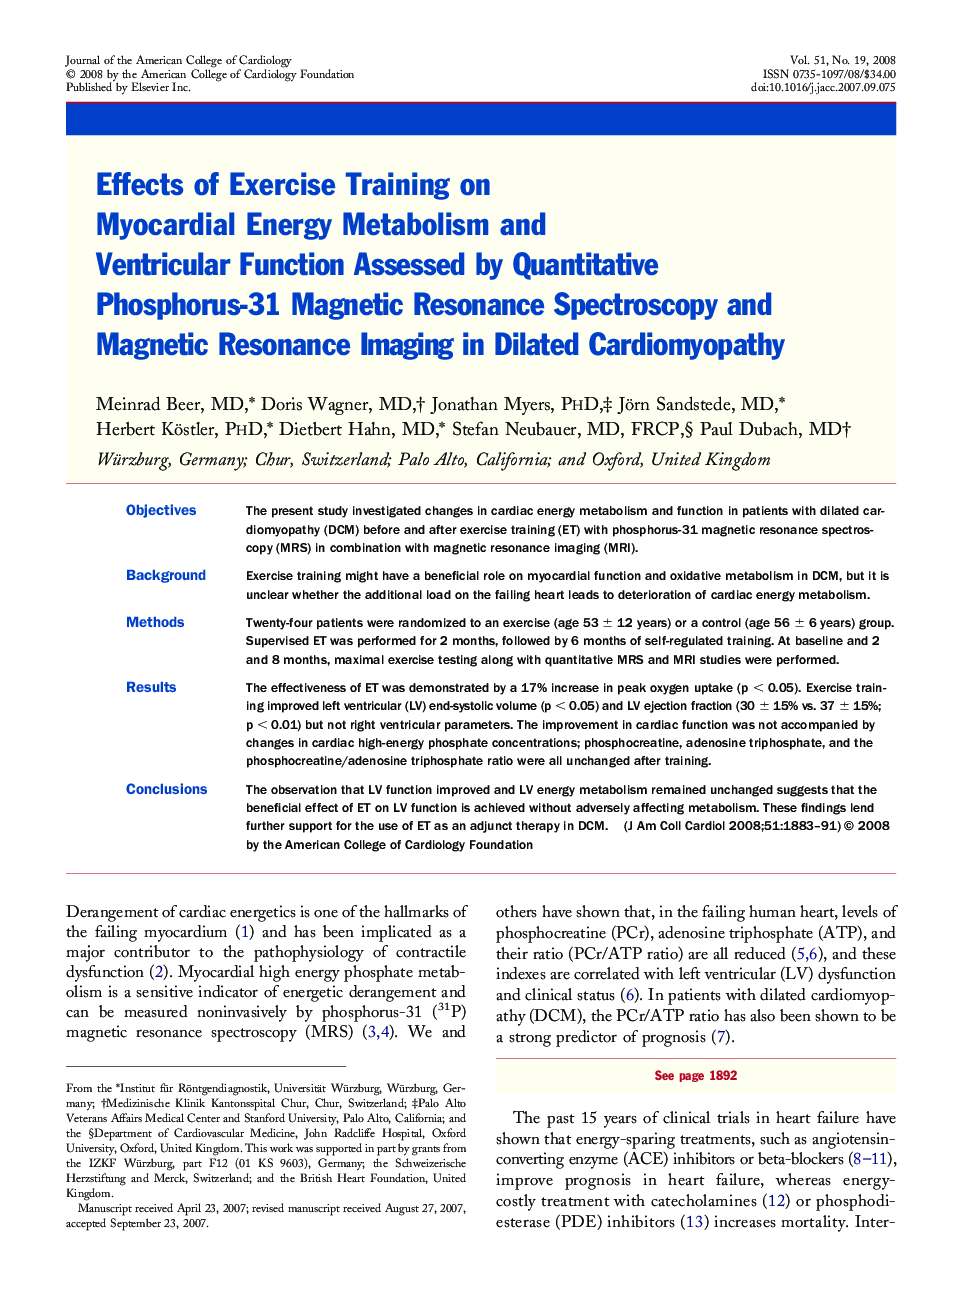 Effects of Exercise Training on Myocardial Energy Metabolism and Ventricular Function Assessed by Quantitative Phosphorus-31 Magnetic Resonance Spectroscopy and Magnetic Resonance Imaging in Dilated Cardiomyopathy 